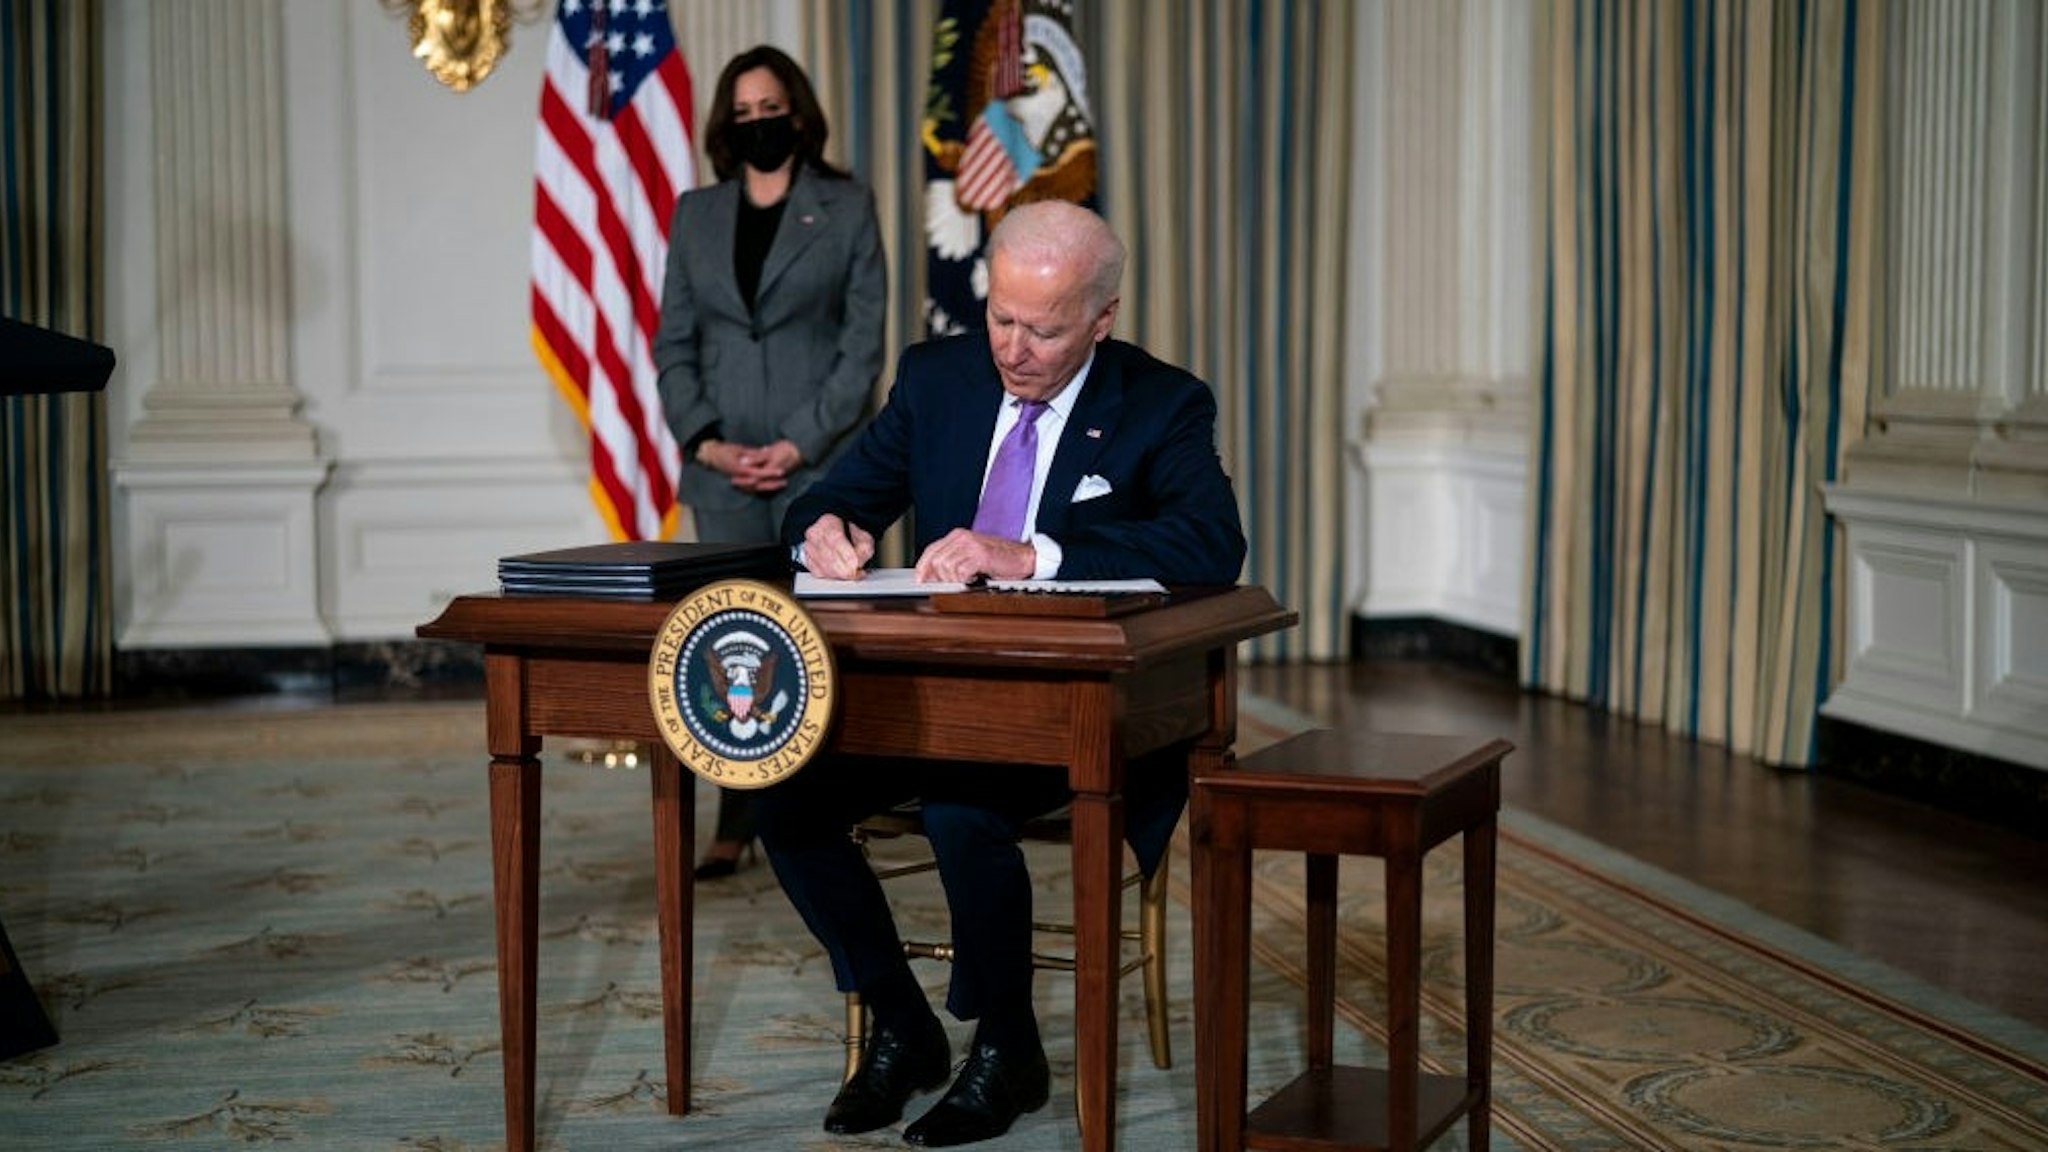 WASHINGTON, DC - JANUARY 26: (L-R) Vice President Kamala Harris looks on as U.S. President Joe Biden signs executives orders related to his racial equity agenda in the State Dining Room of the White House on January 26, 2021 in Washington, DC. President Biden signed executive actions Tuesday on housing and justice reforms, including a directive to the Department of Justice to end its use of private prisons. (Photo by